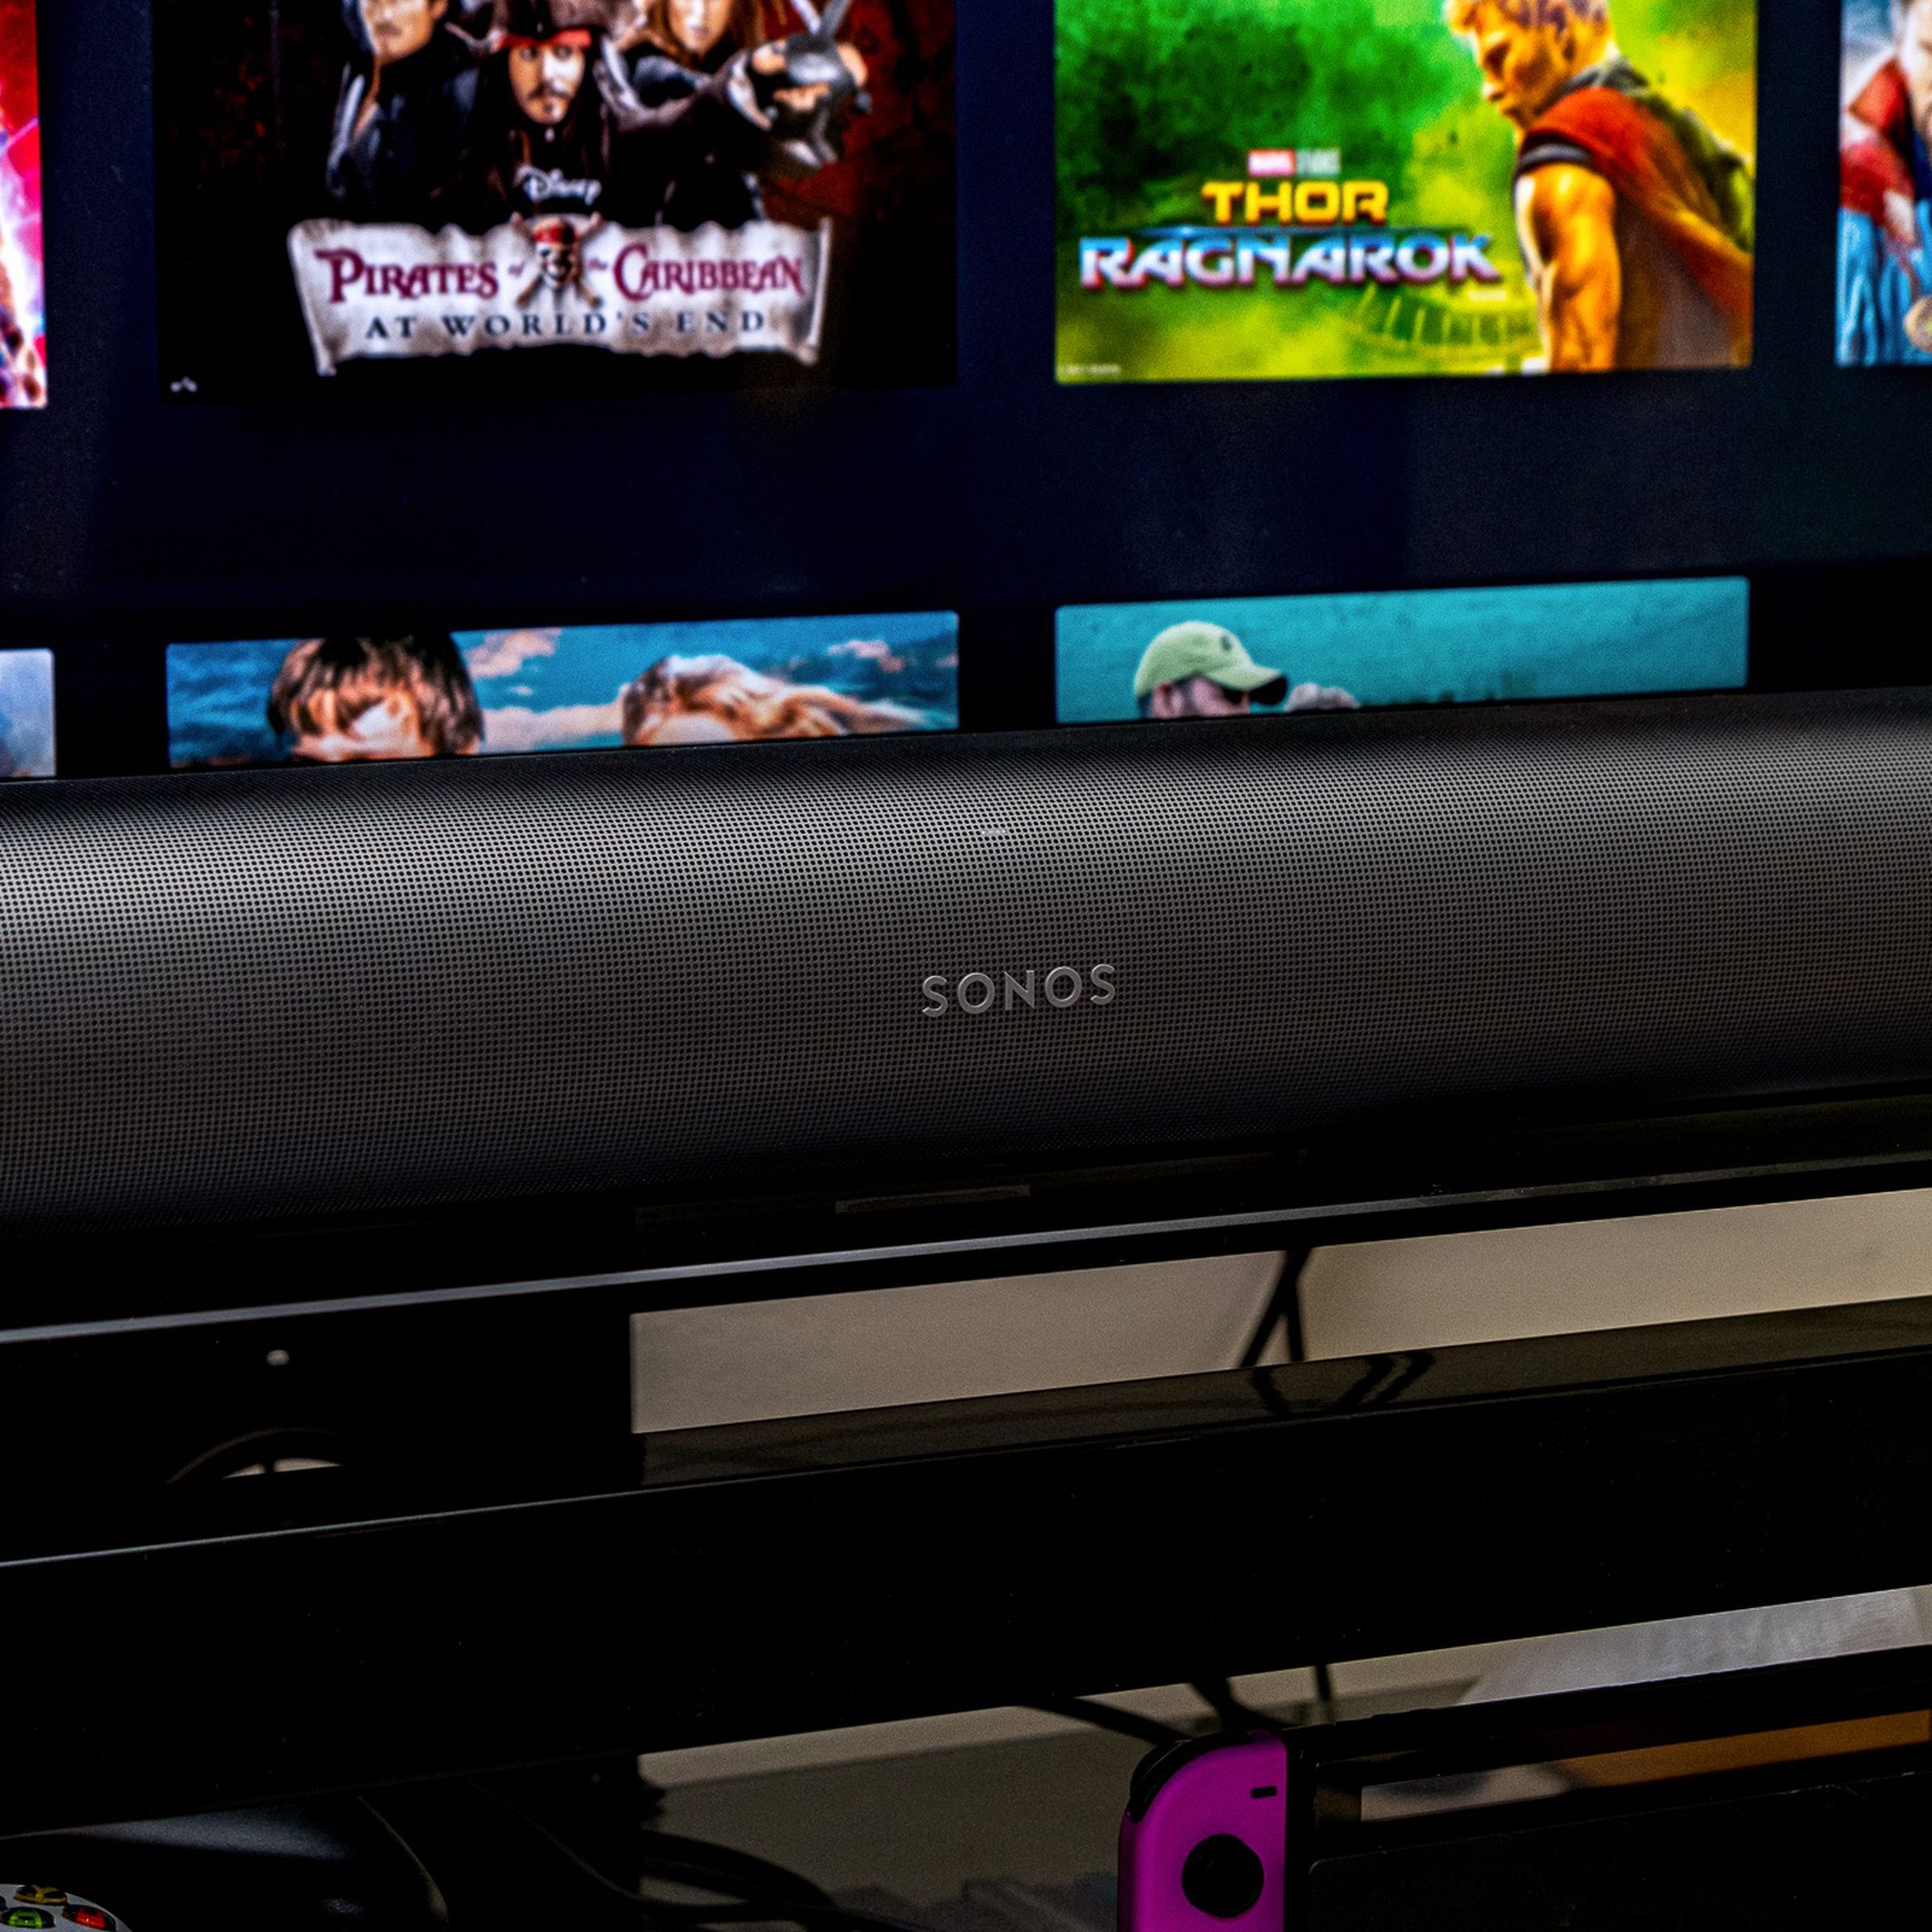 An image of the front of the Sonos Arc soundbar with a TV in the background.